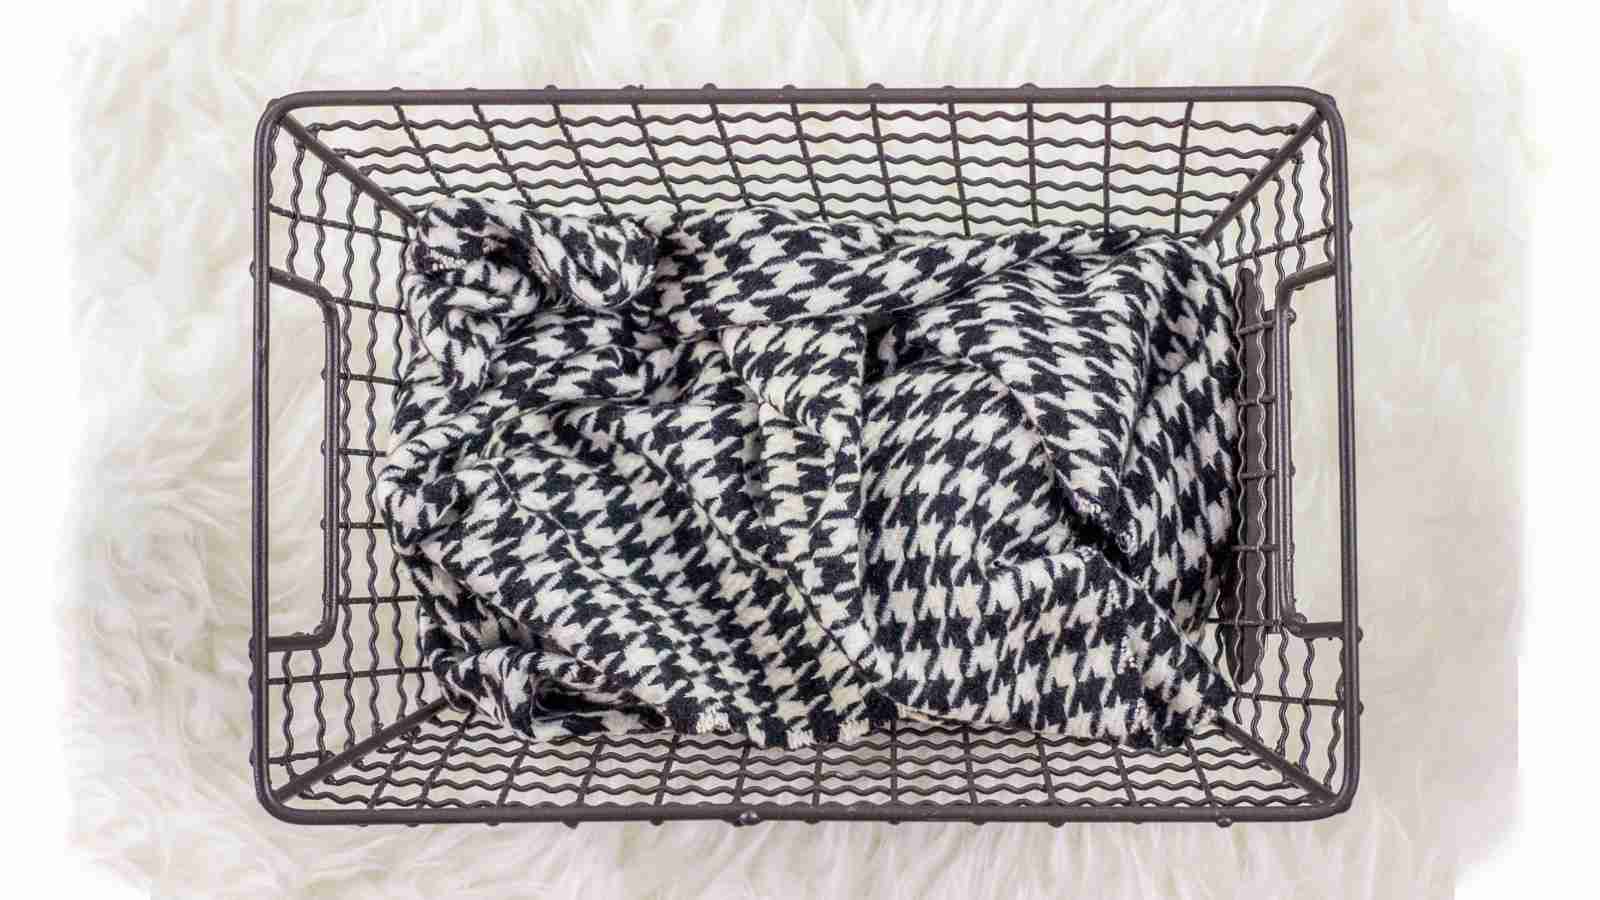 Keep fabric in wire baskets